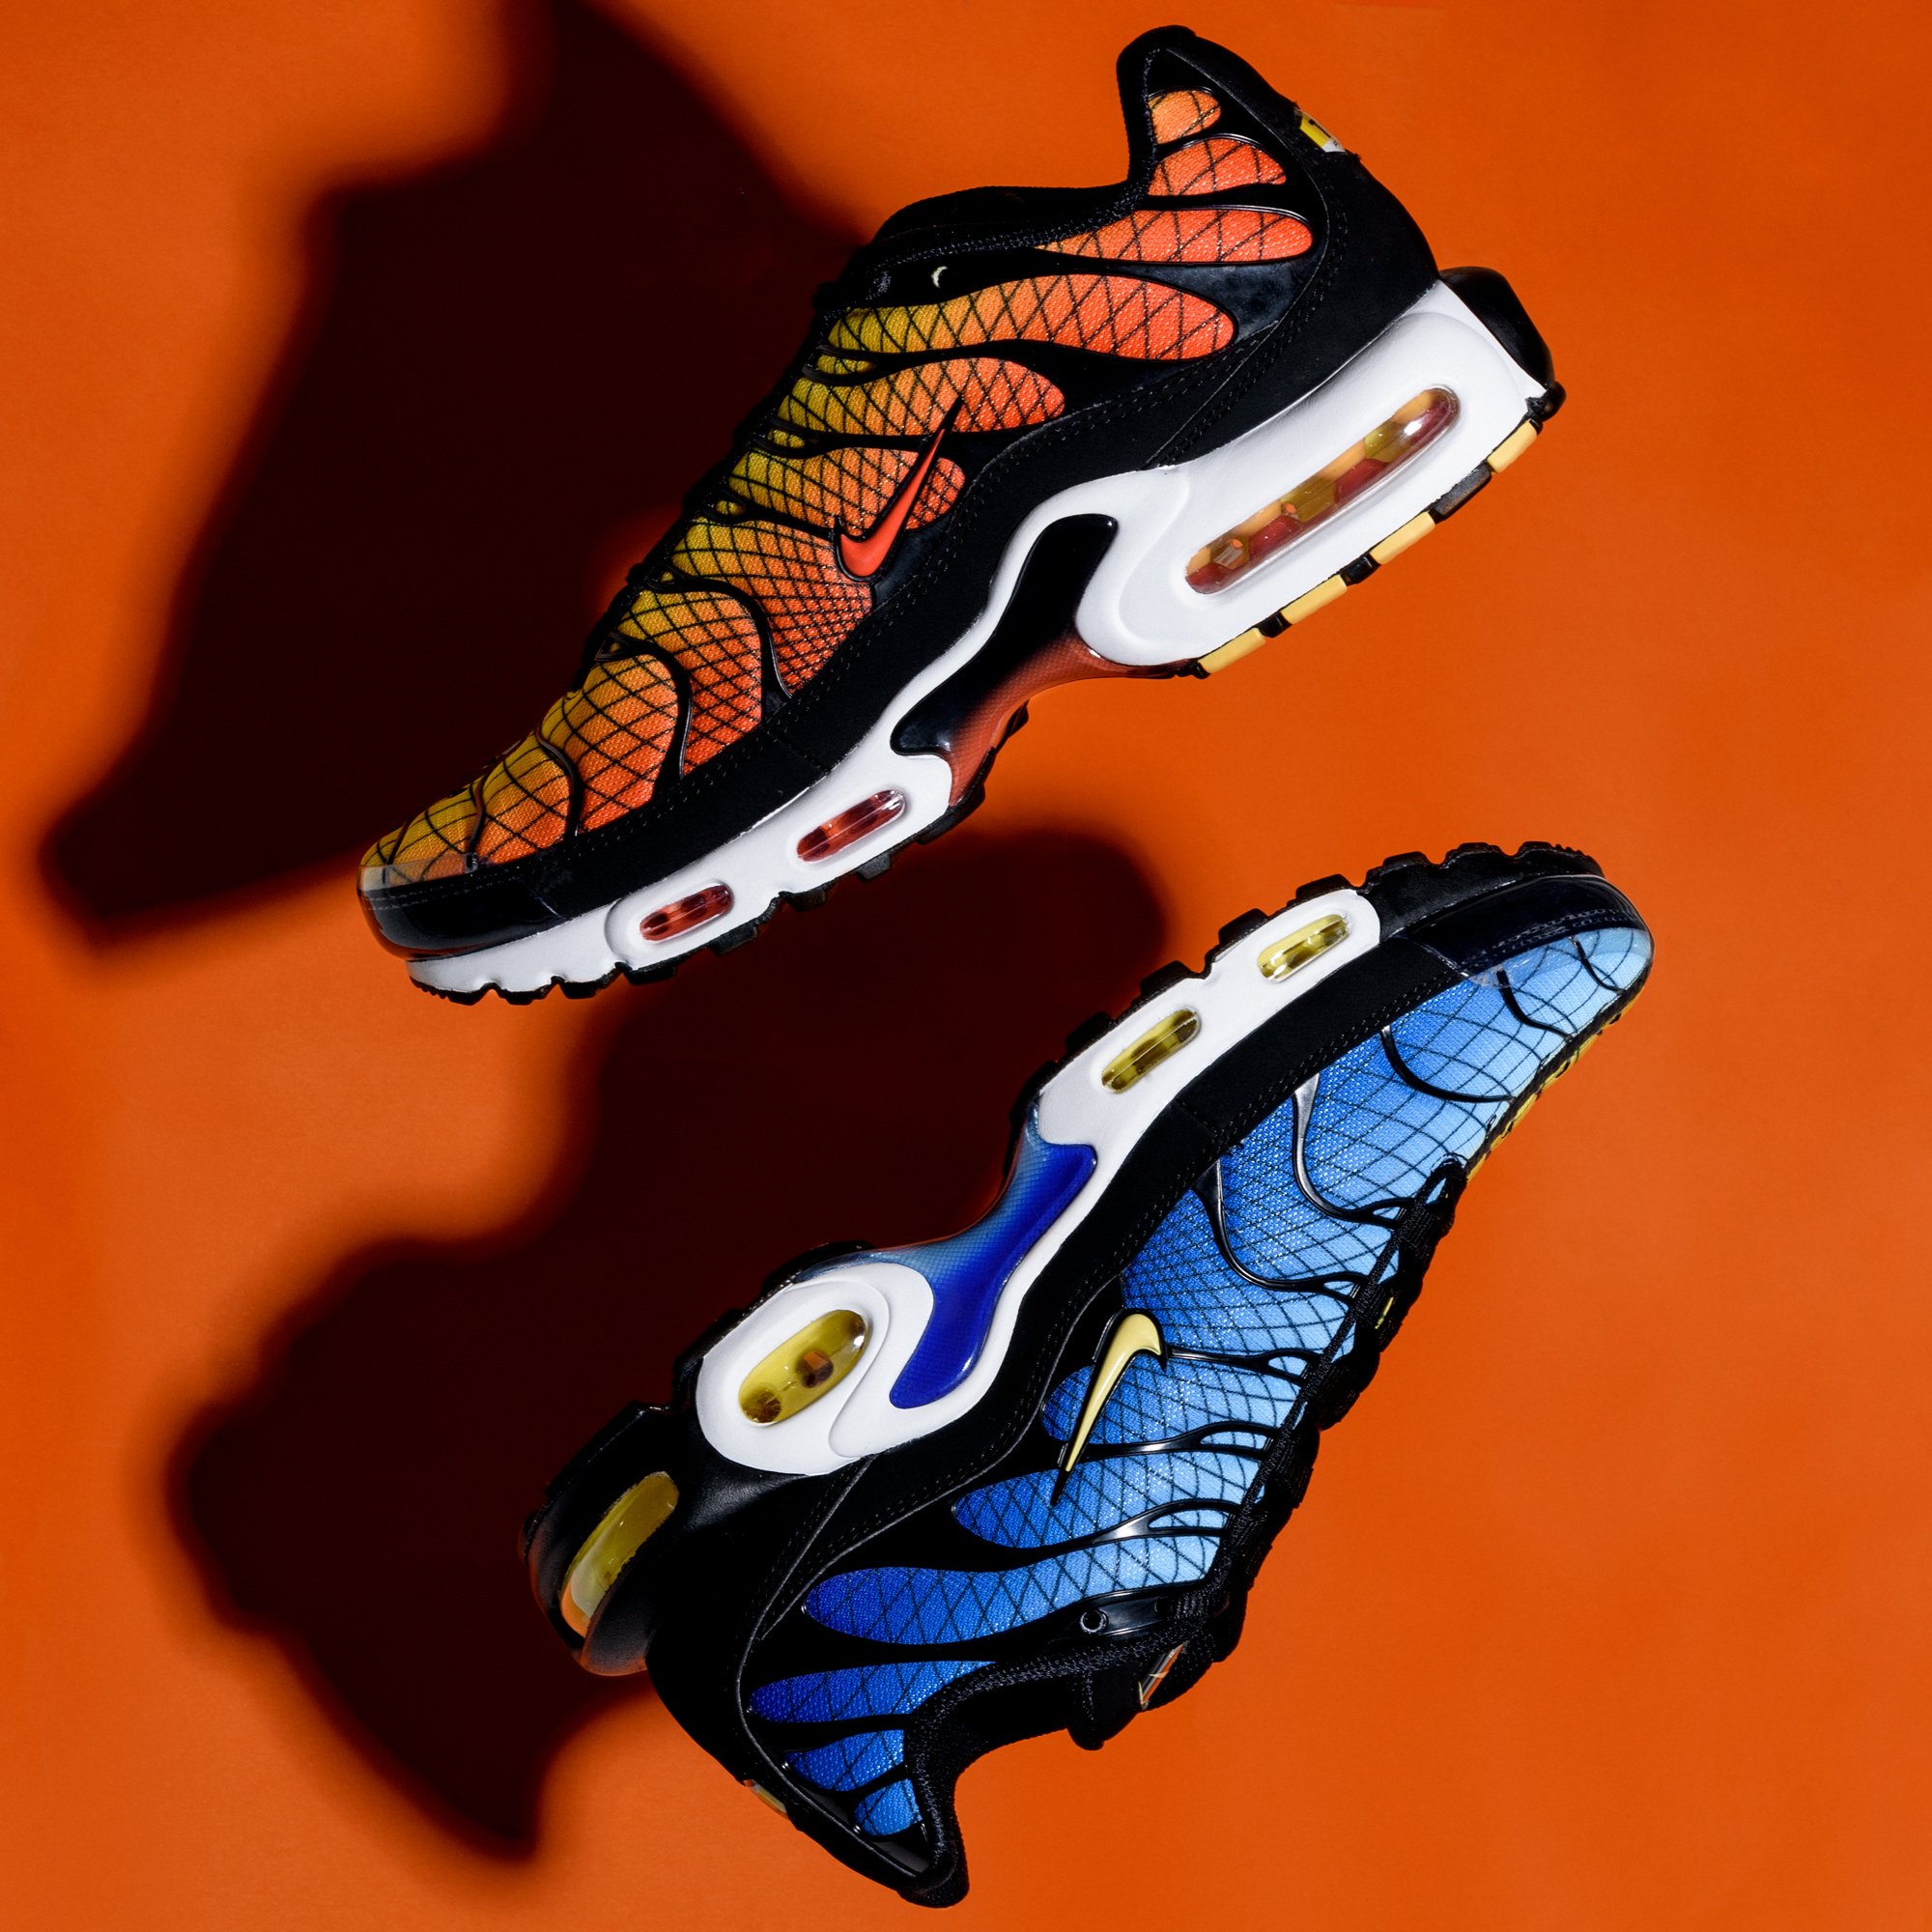 sivasdescalzo on Twitter: "Nike Max Plus TN fuses the original colorways of its most iconic models into one sneaker, featuring a half-and-half and an over grid. Available now at